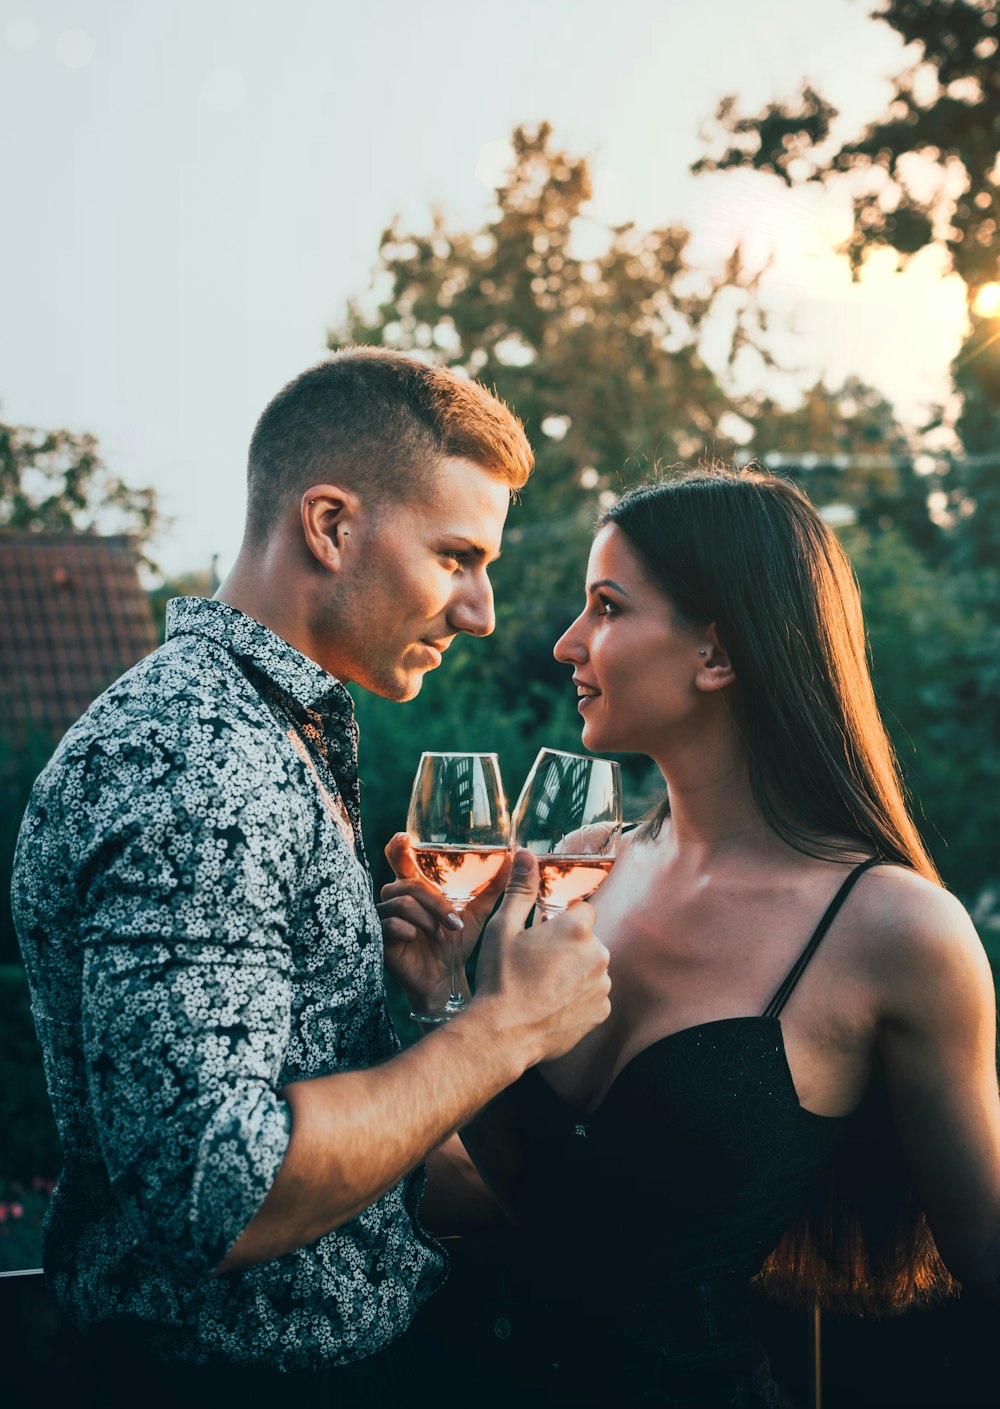 man and woman holding wine glasses